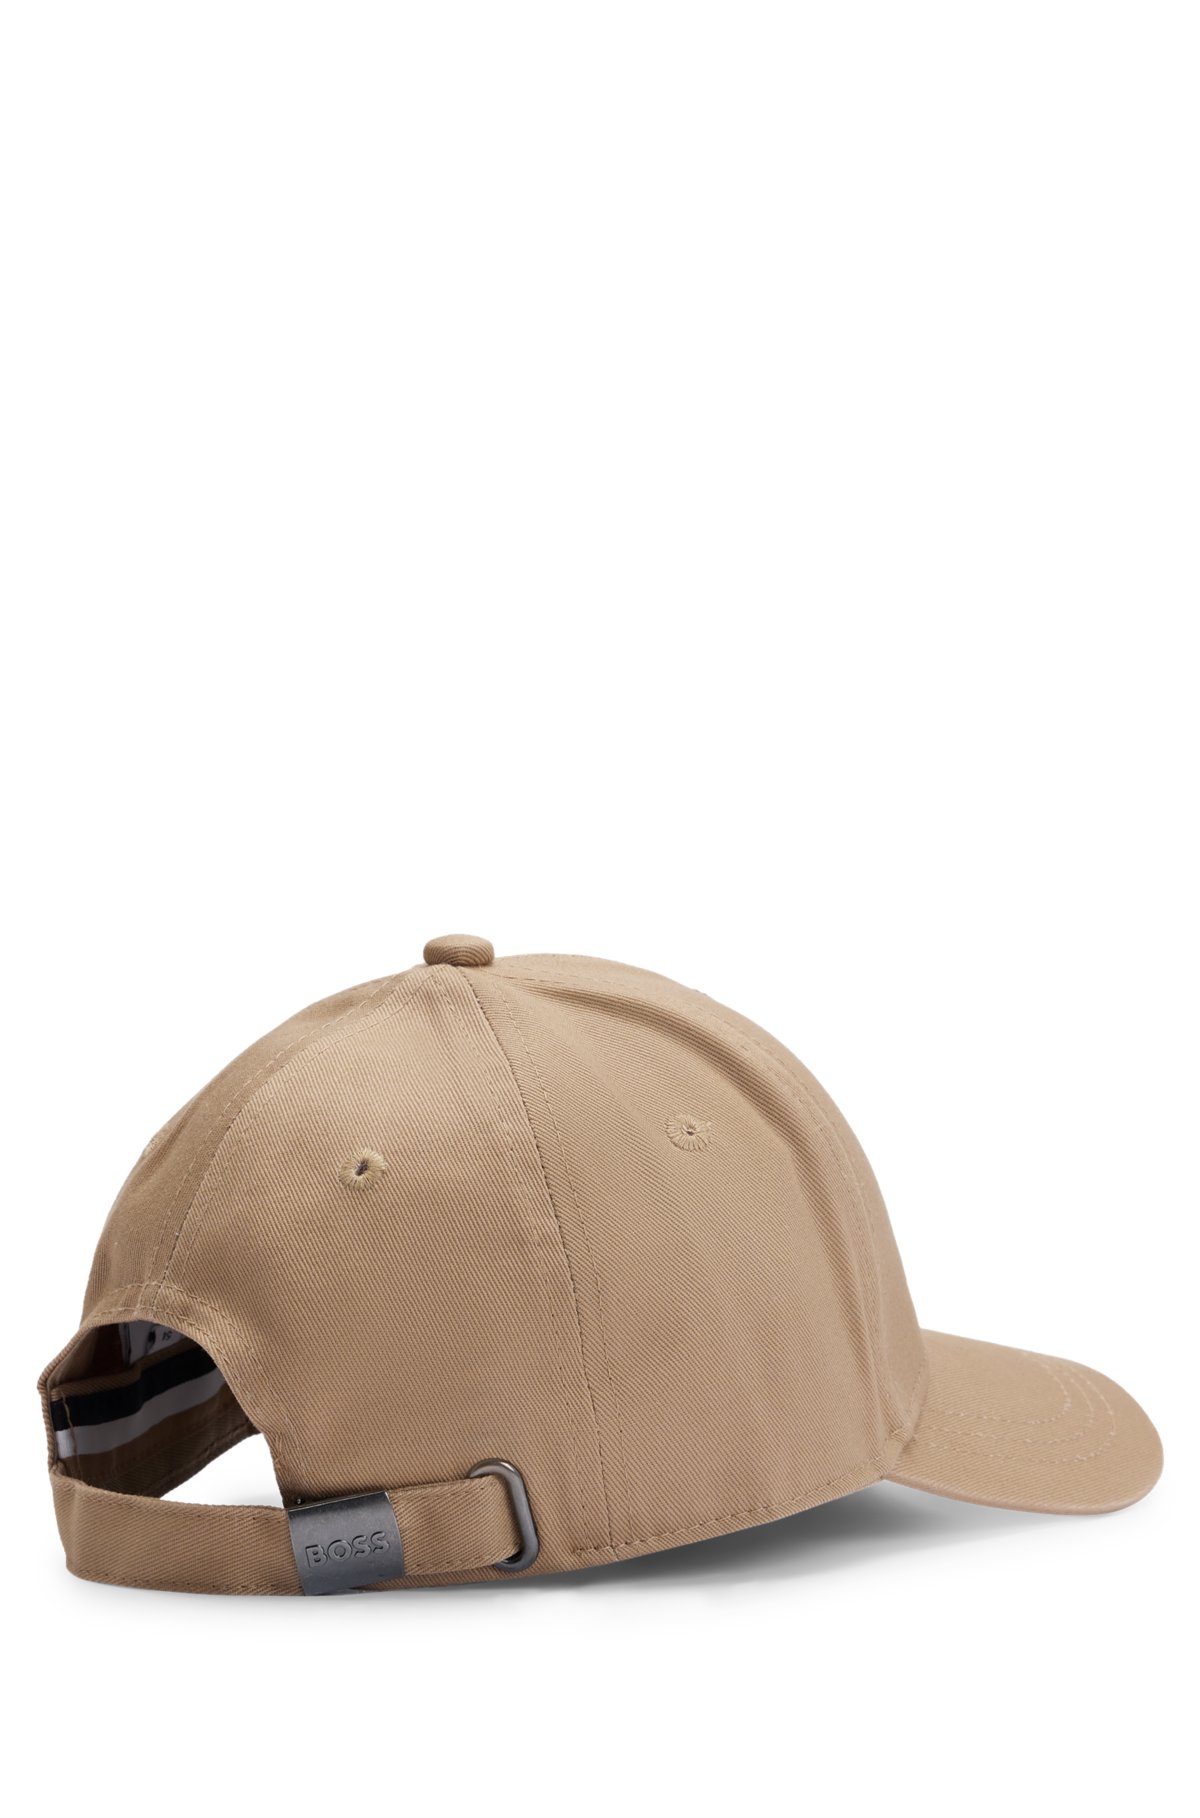 Kids' cap in cotton twill with logo details, Brown